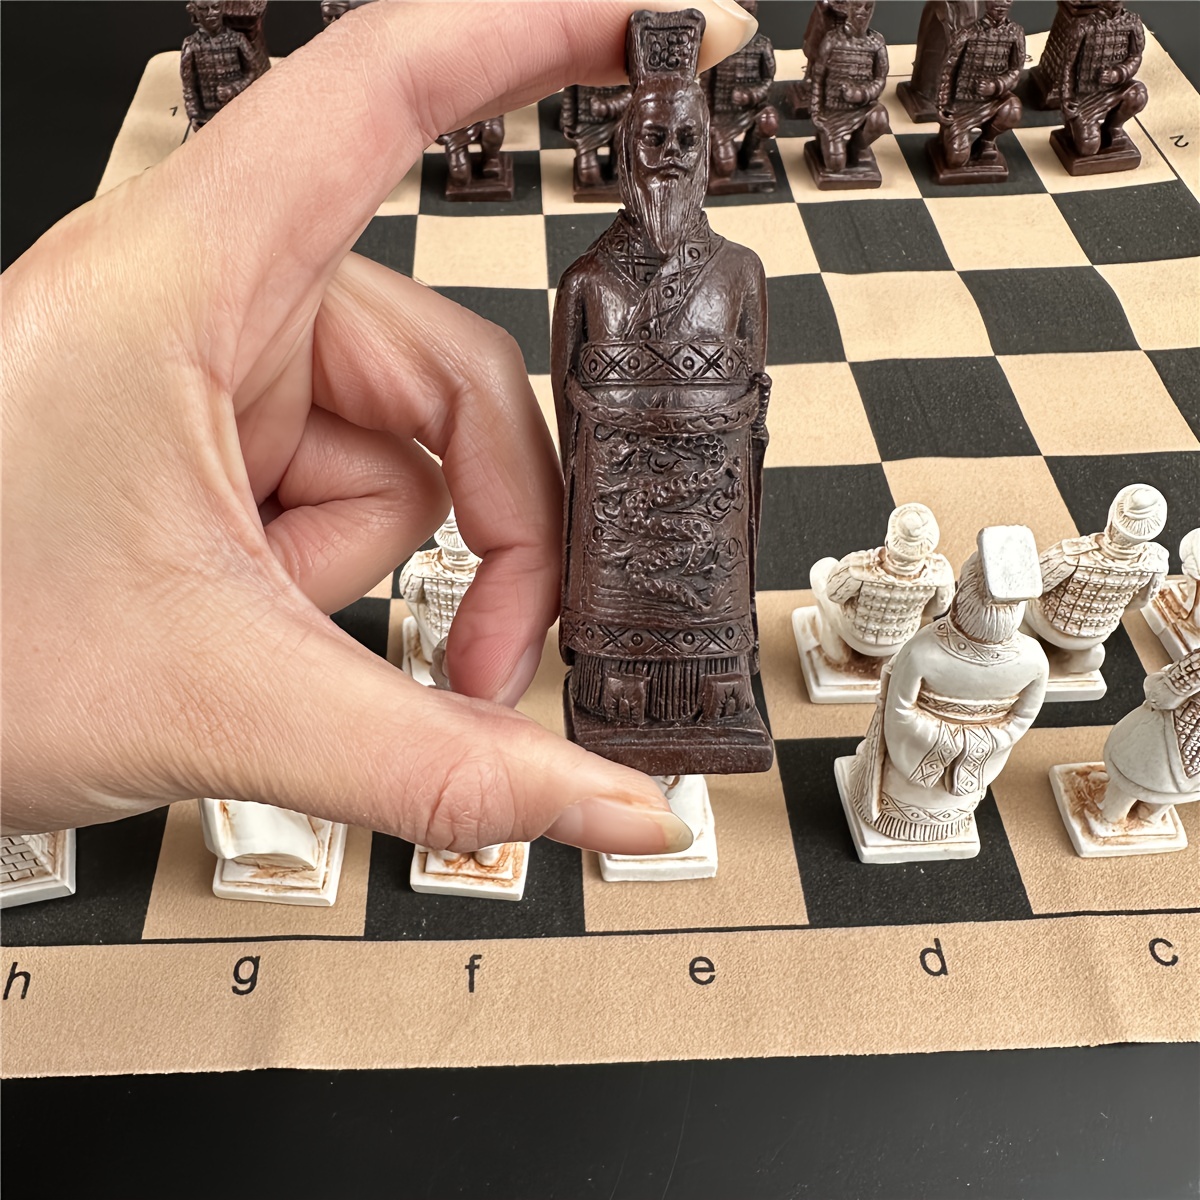 

Large Chess Creative 3d Terra-cotta Warriors Resin Chess Pieces, Old Treatment Character Modeling Antique Faux Leather Chess Board 43*43cm (16.93inch), Entertainment Game Toy